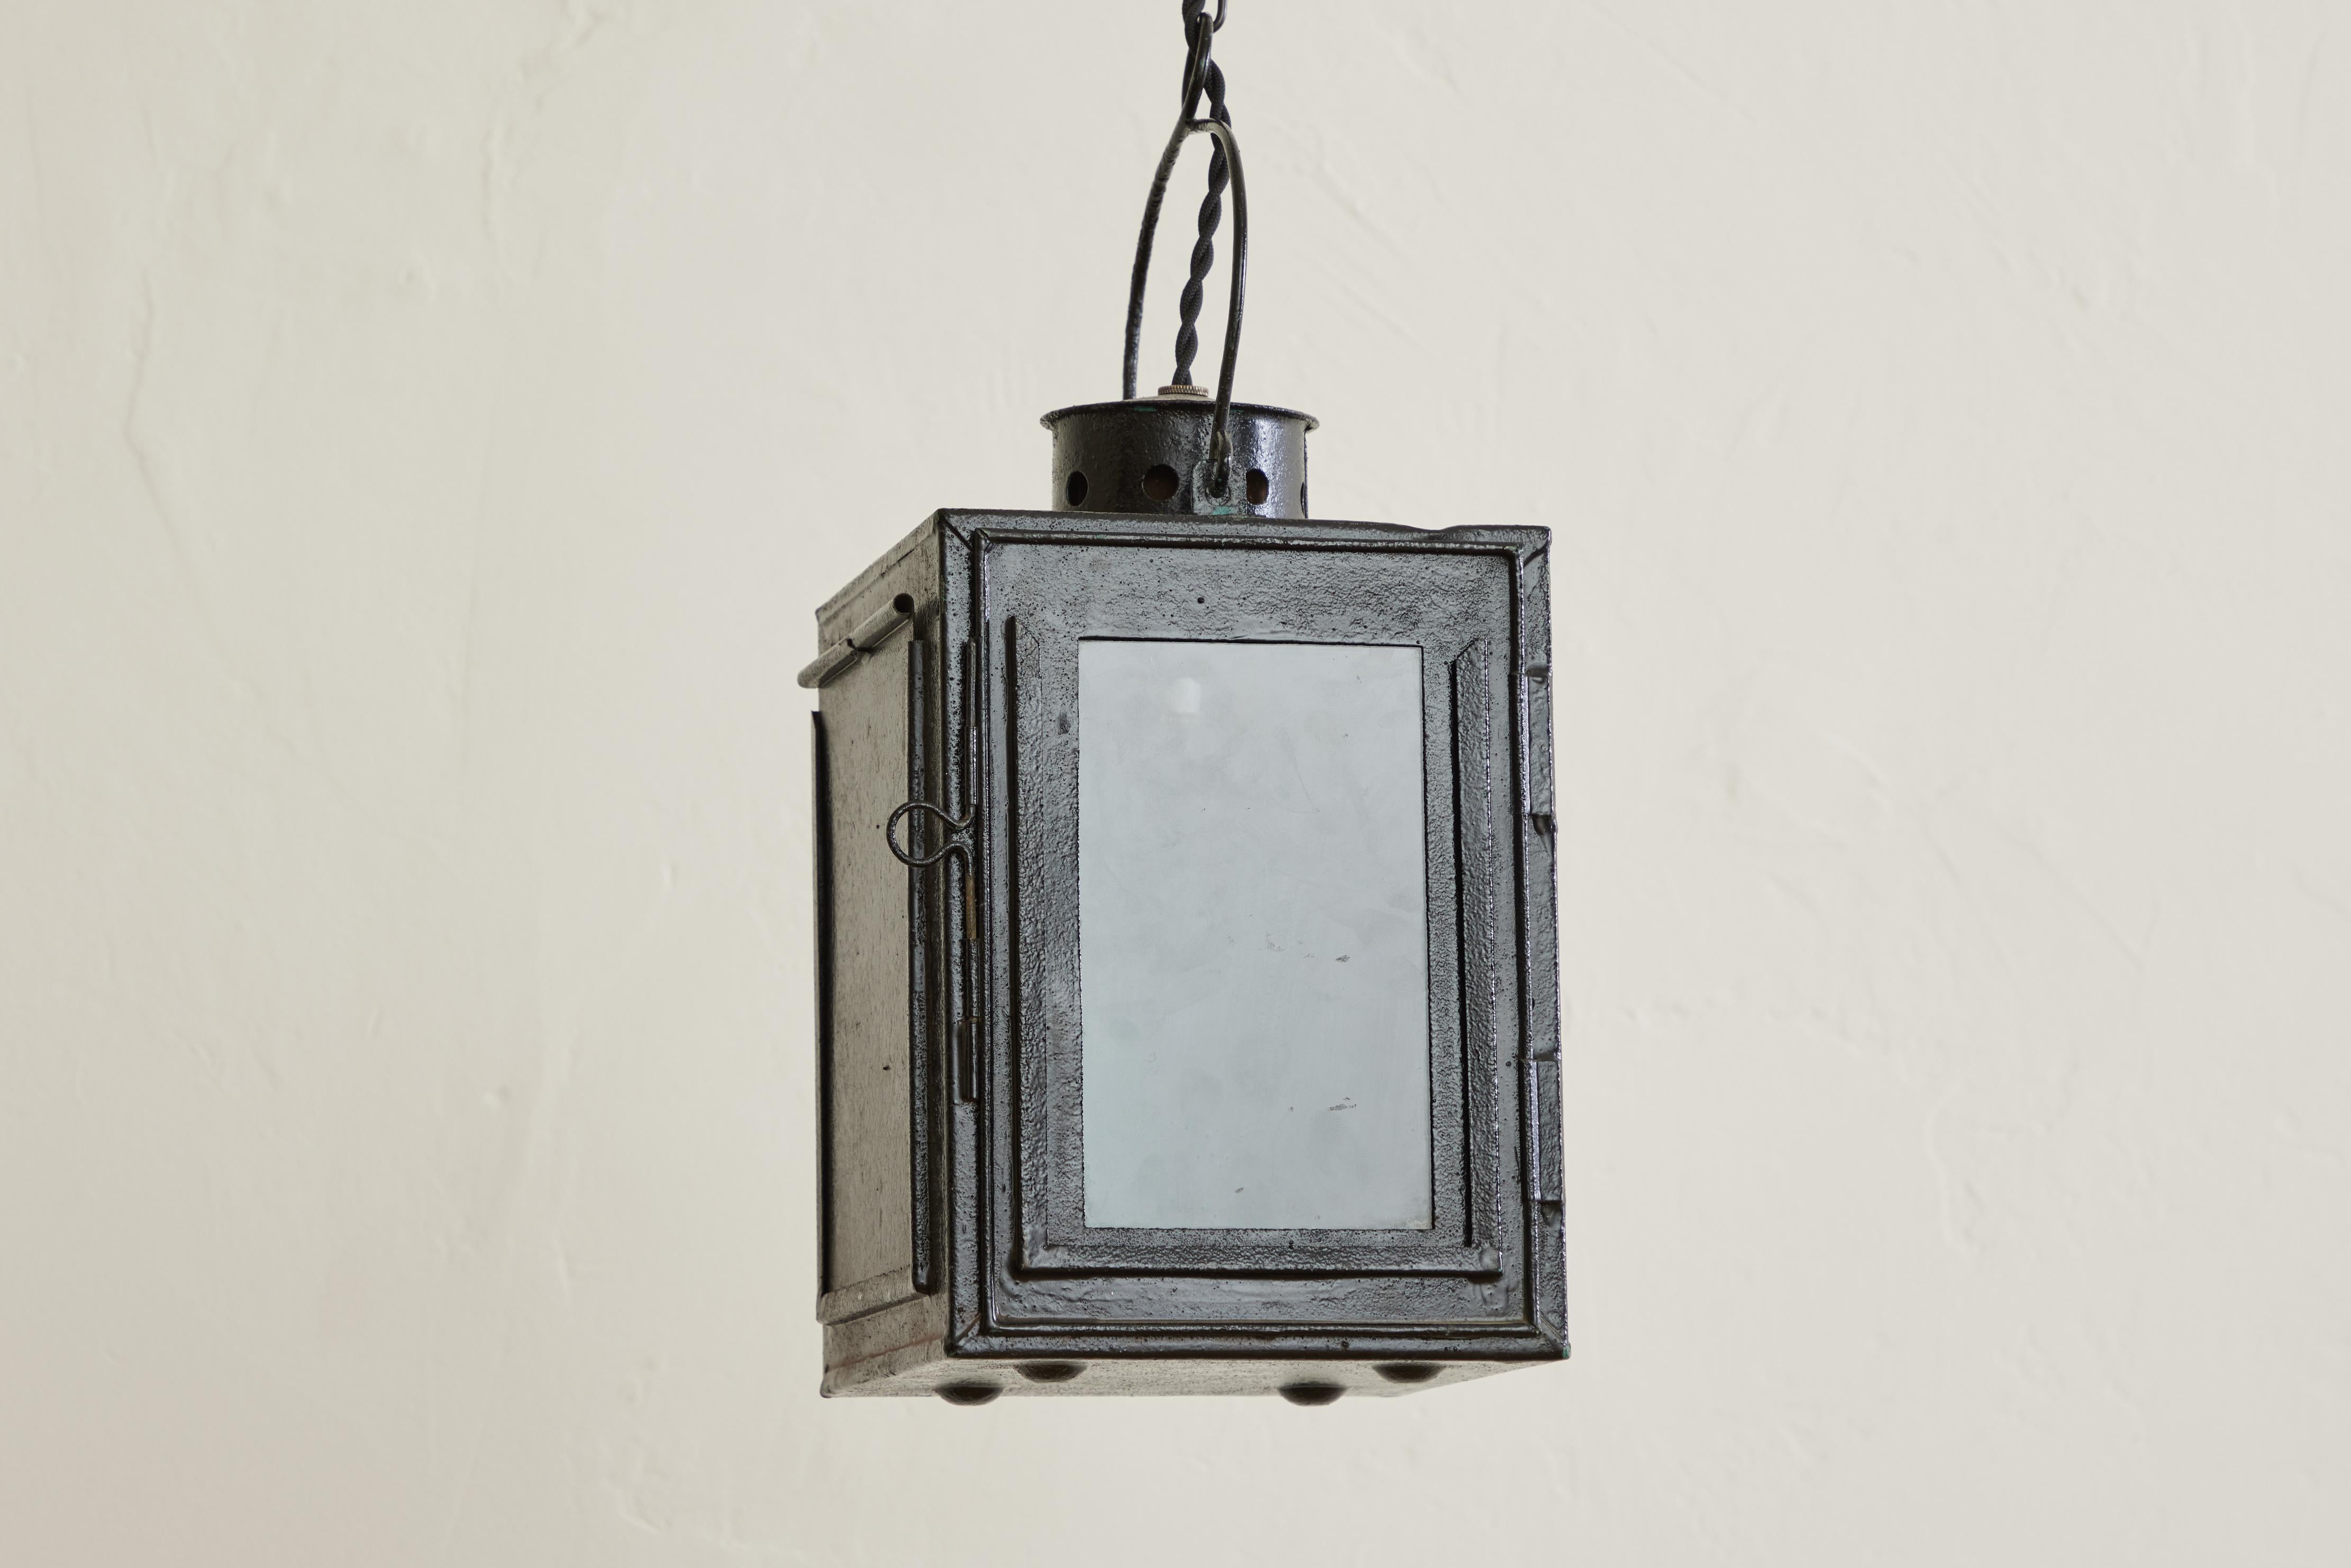 French tole lantern with a single glass panel. Blue metal interior and a punched tin top. Newly wired for hardwire installation. Wear throughout on original metal is consistent with age and use.